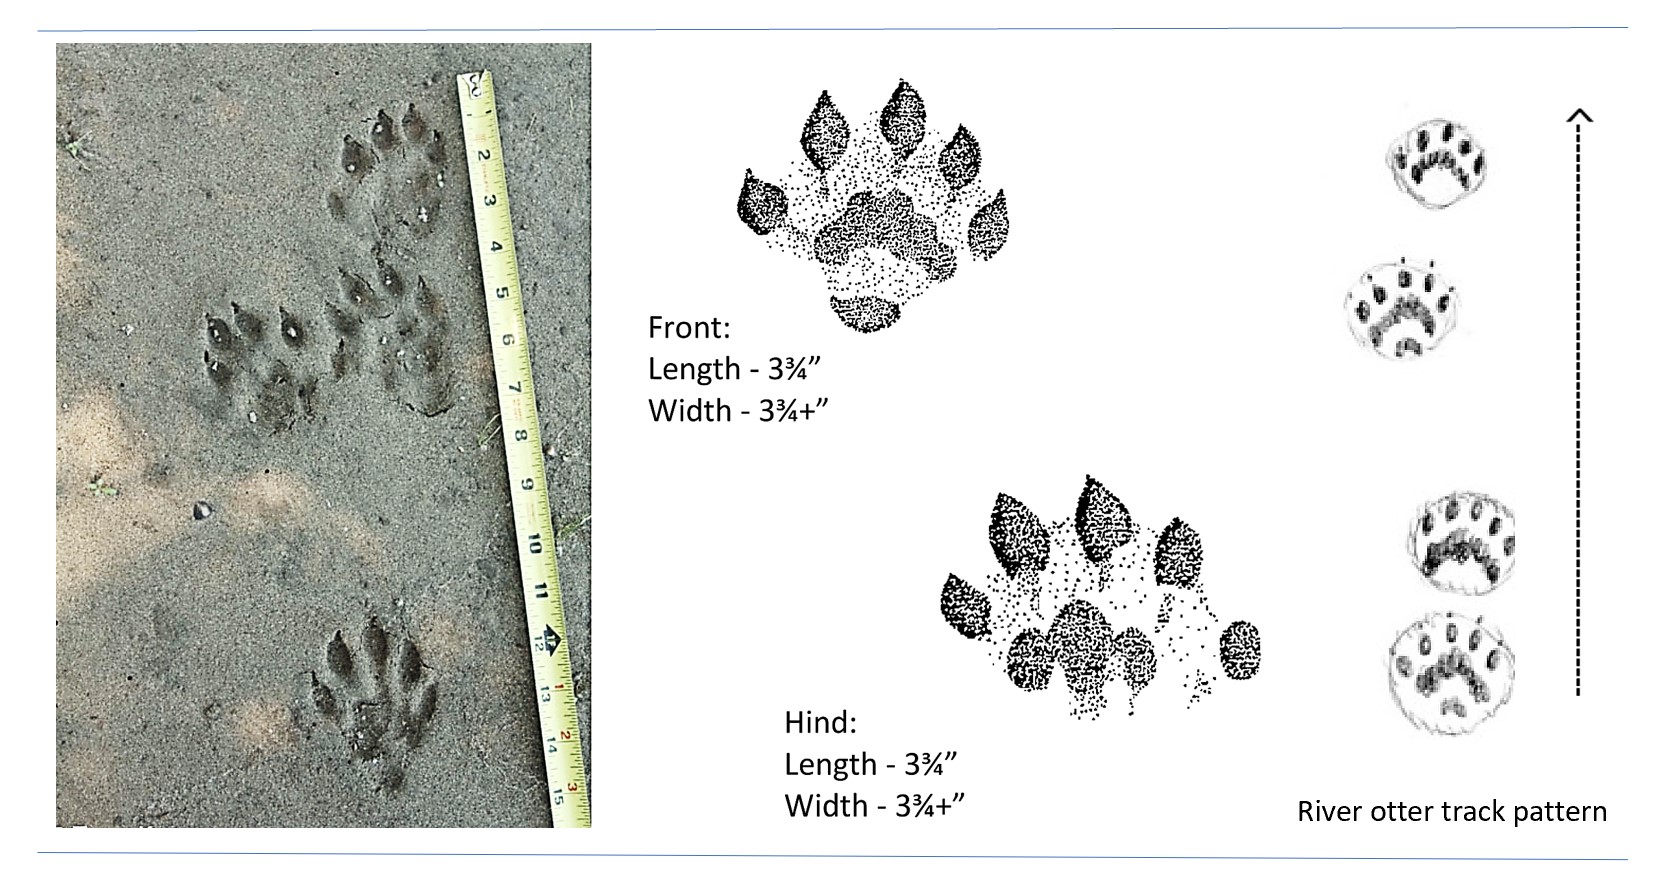 Photo and illustrated tracks of a river otter.